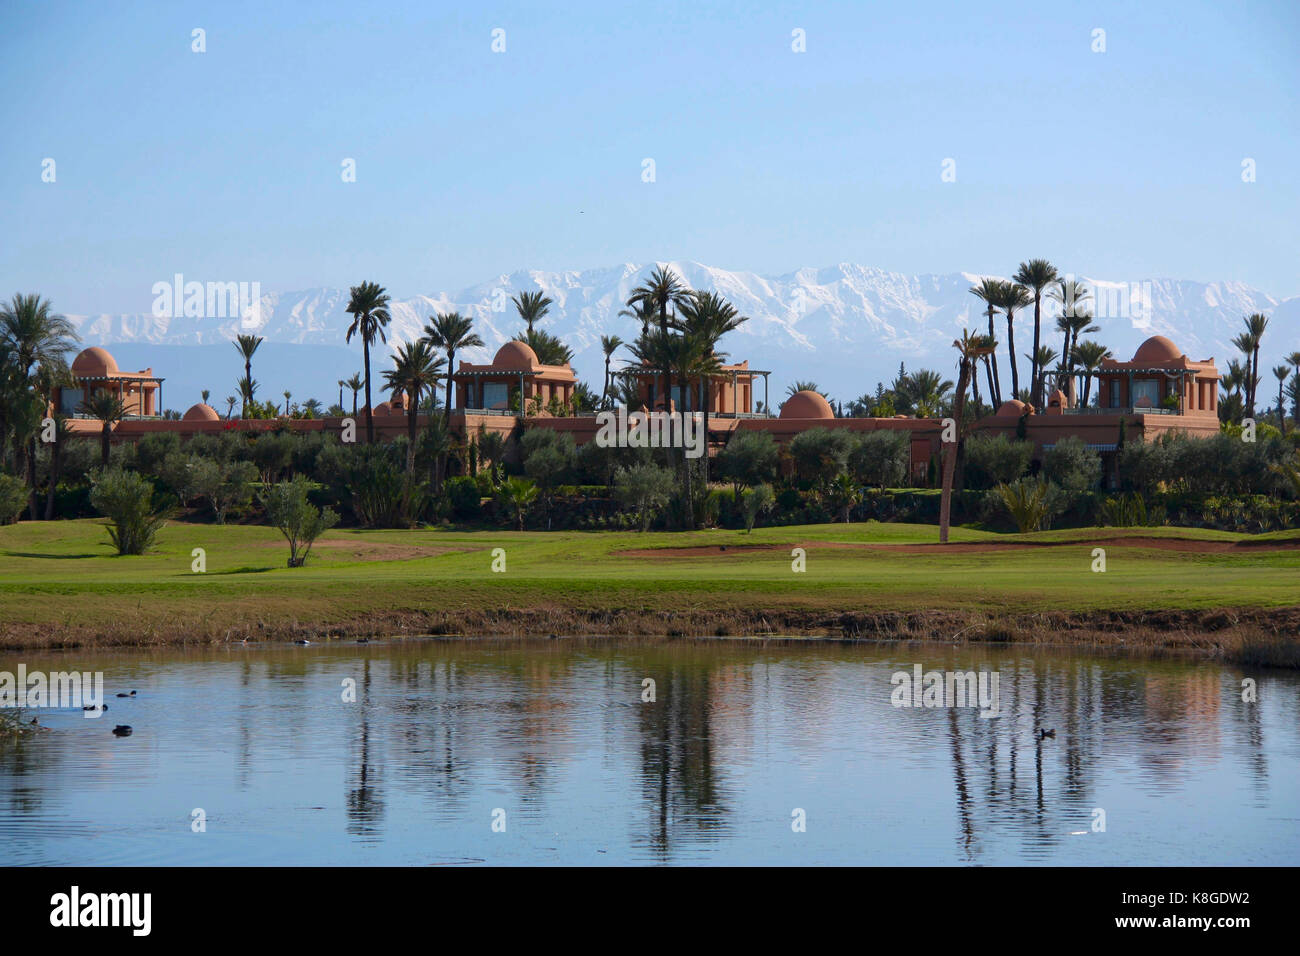 Beautiful Landscape of the Atlas Mountains from Marrakech Royal Golf Club Stock Photo